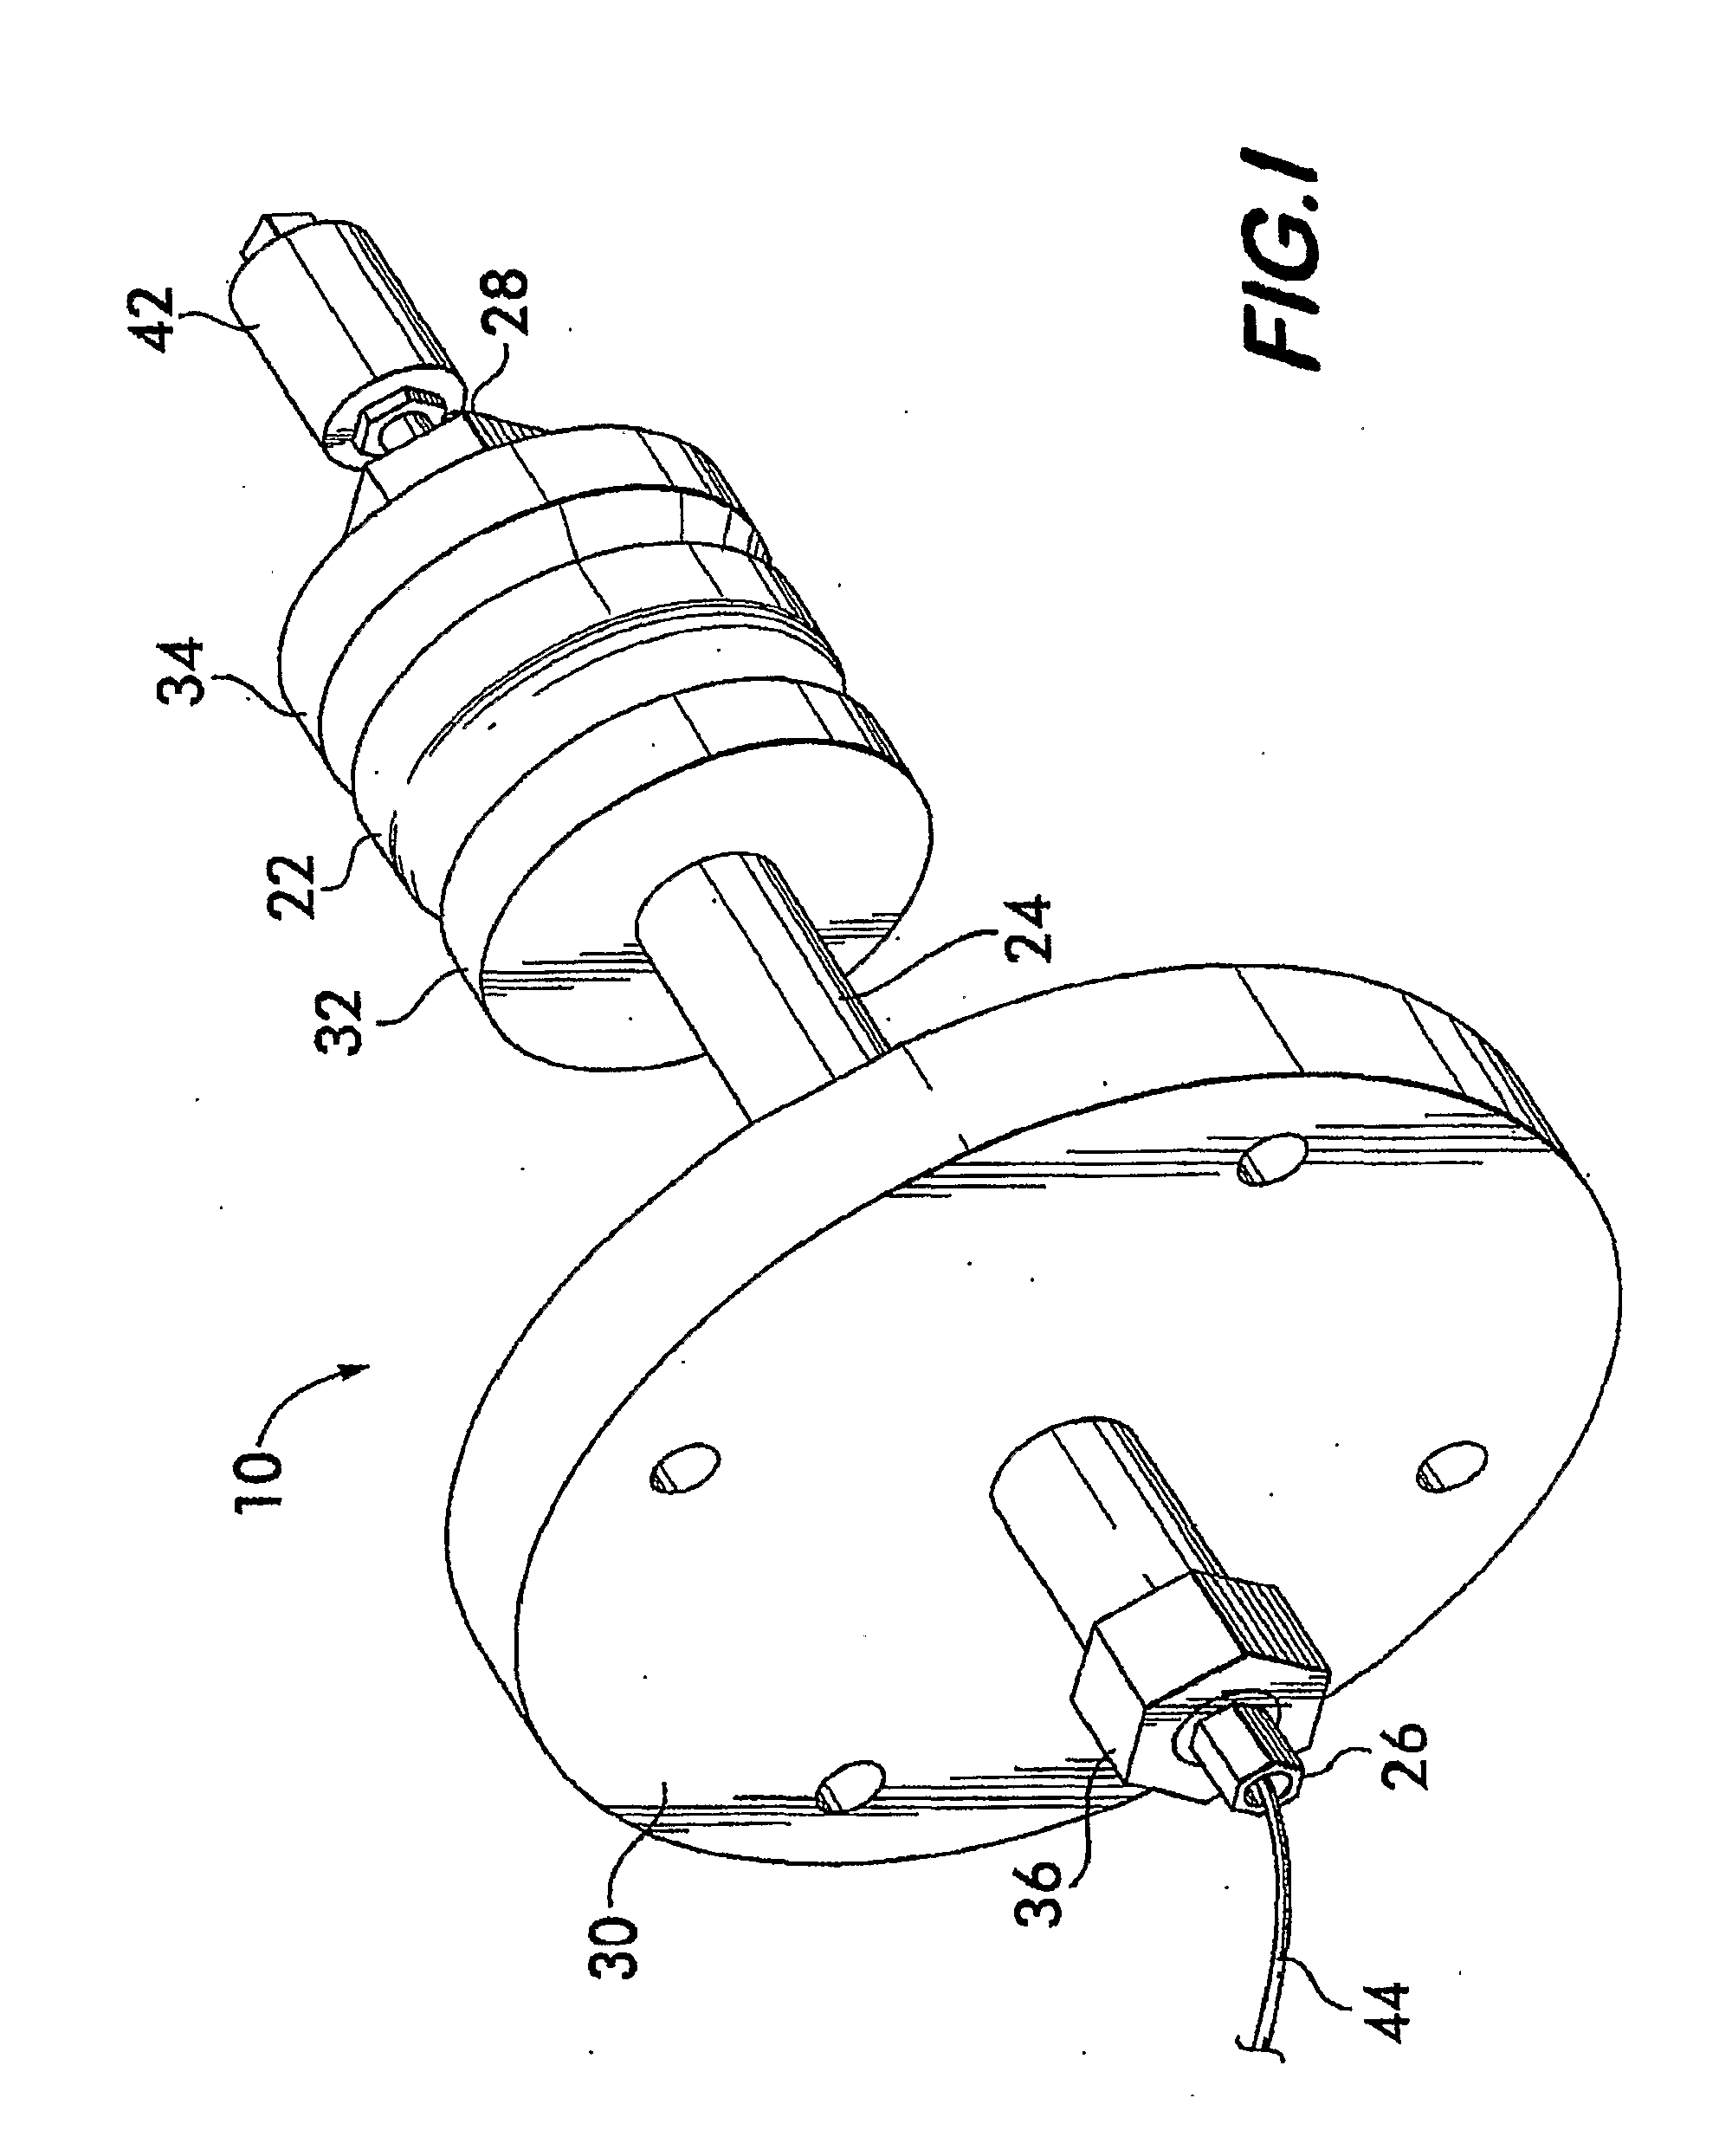 Test Plug and Method for Monitoring Downstream Conditions